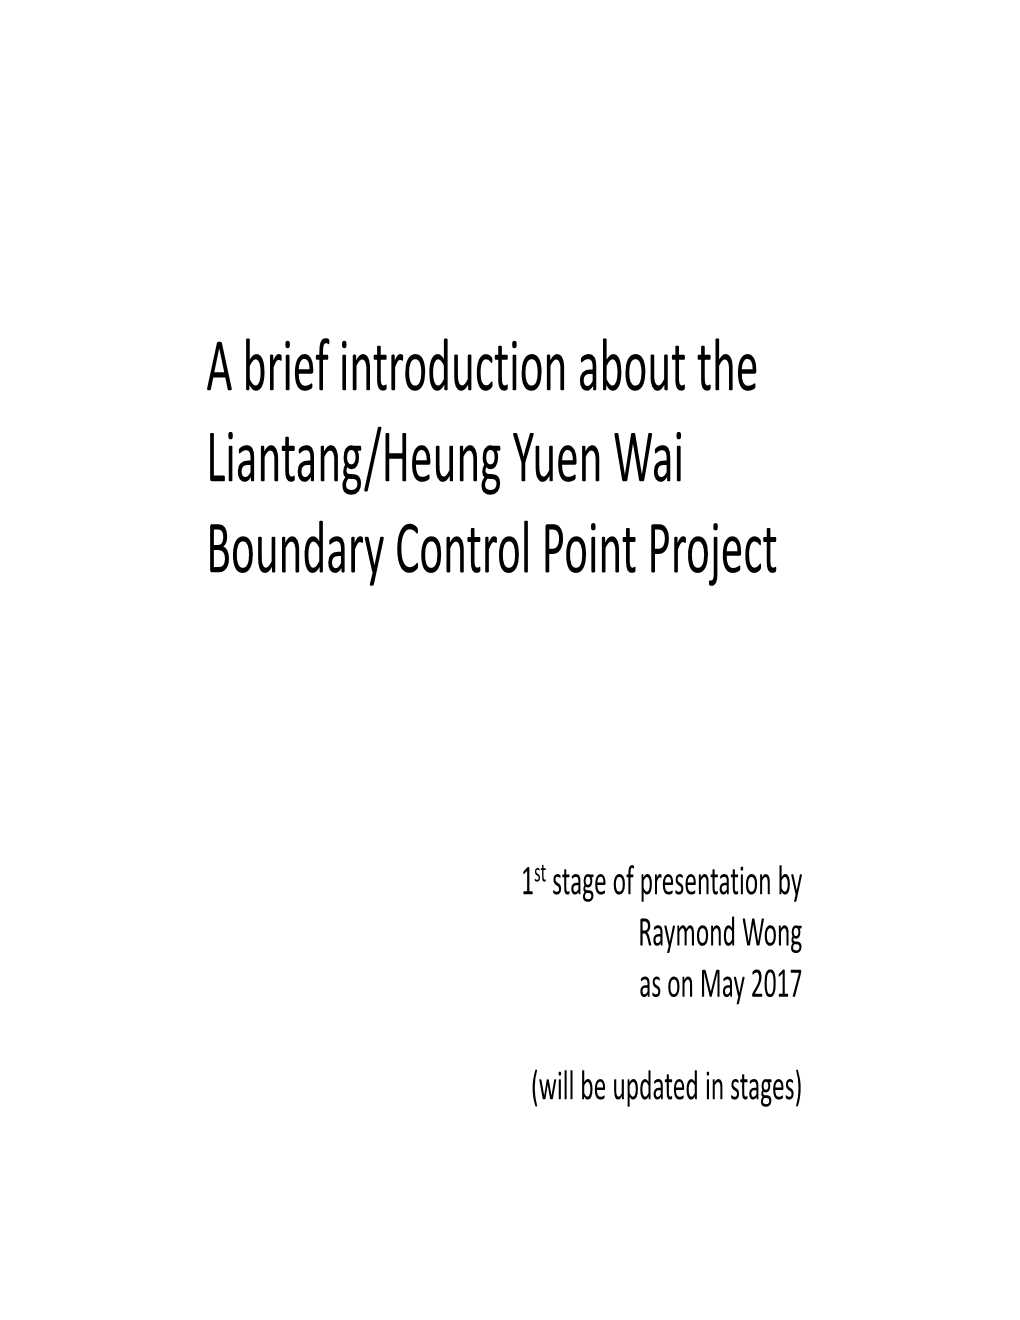 A Brief Introduction About the Liantang/Heung Yuen Wai Boundary Control Point Project